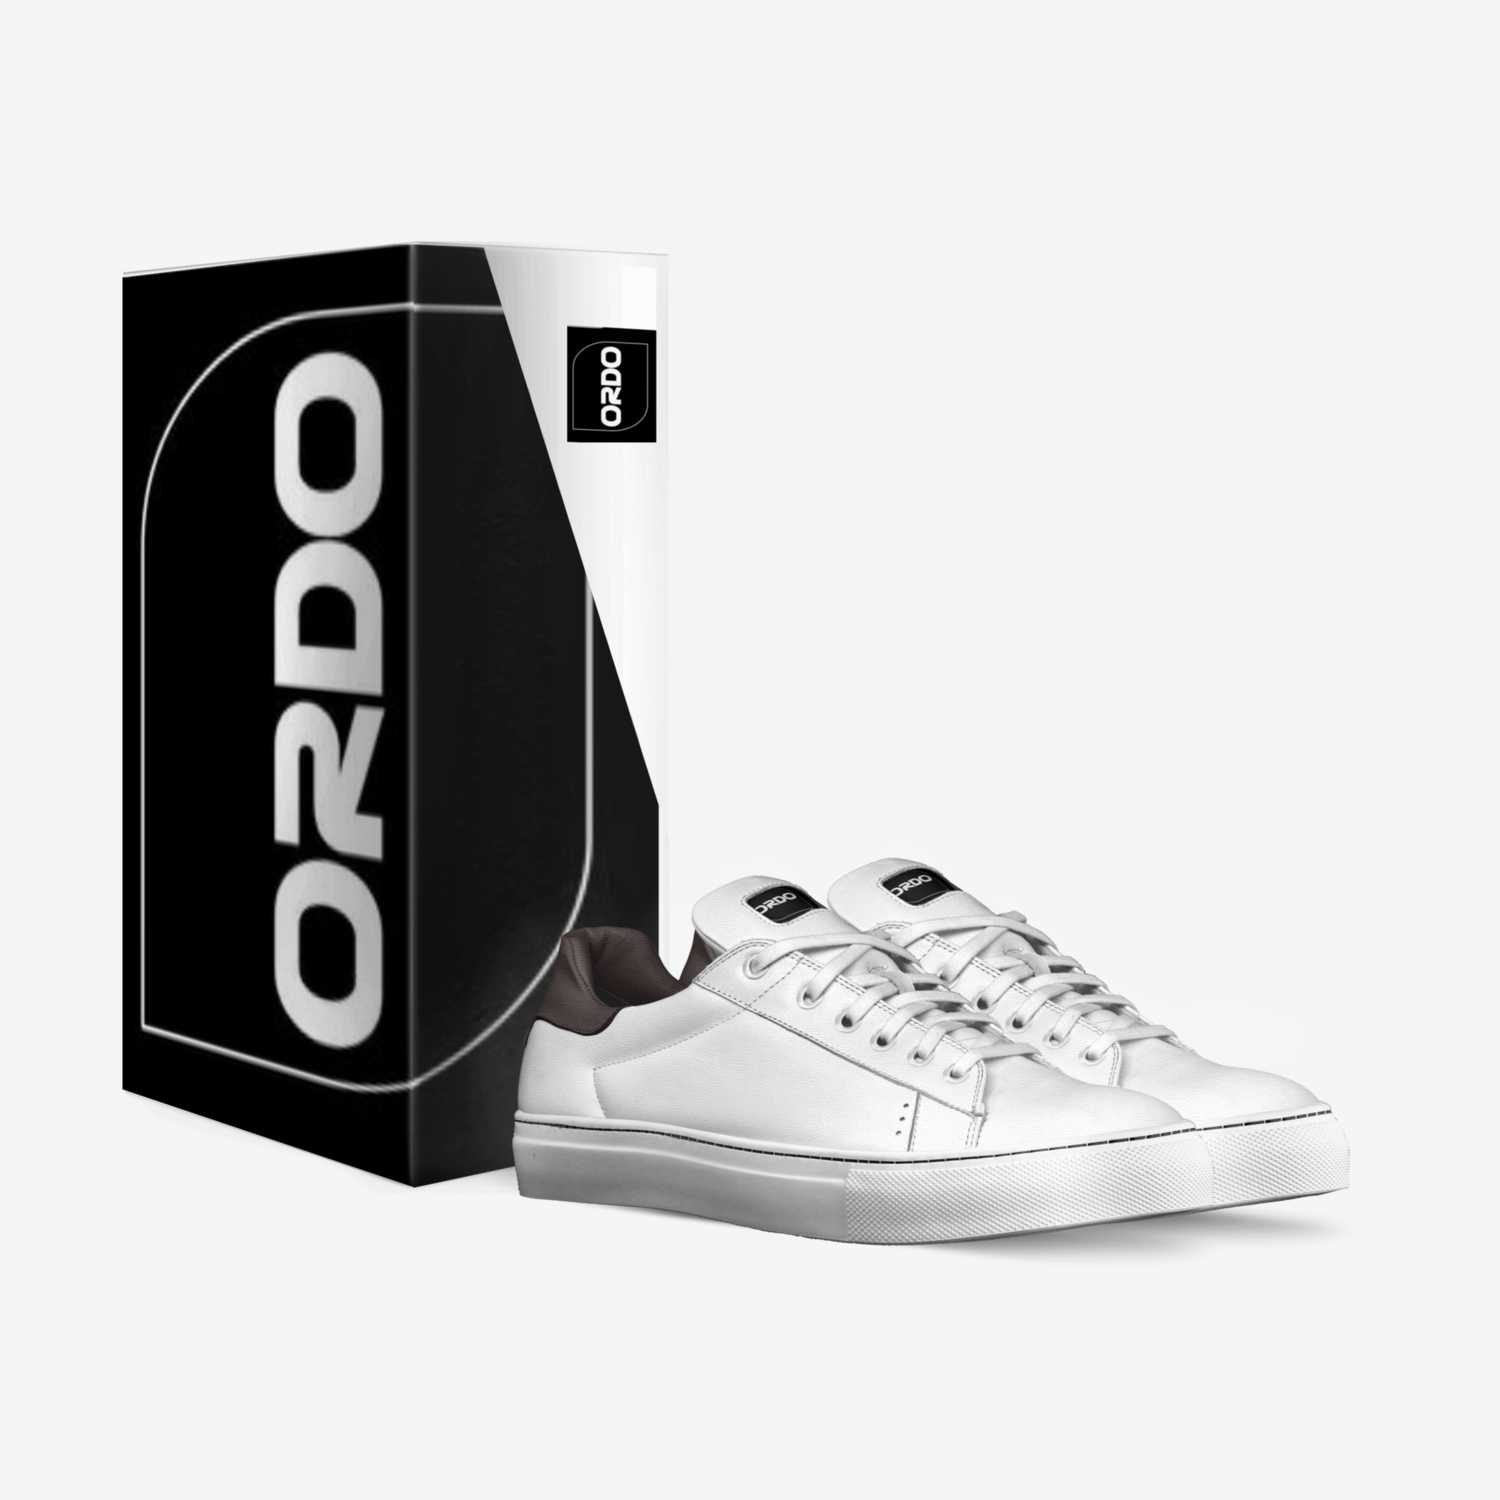 Ordostyle custom made in Italy shoes by Erisa Hoxha | Box view